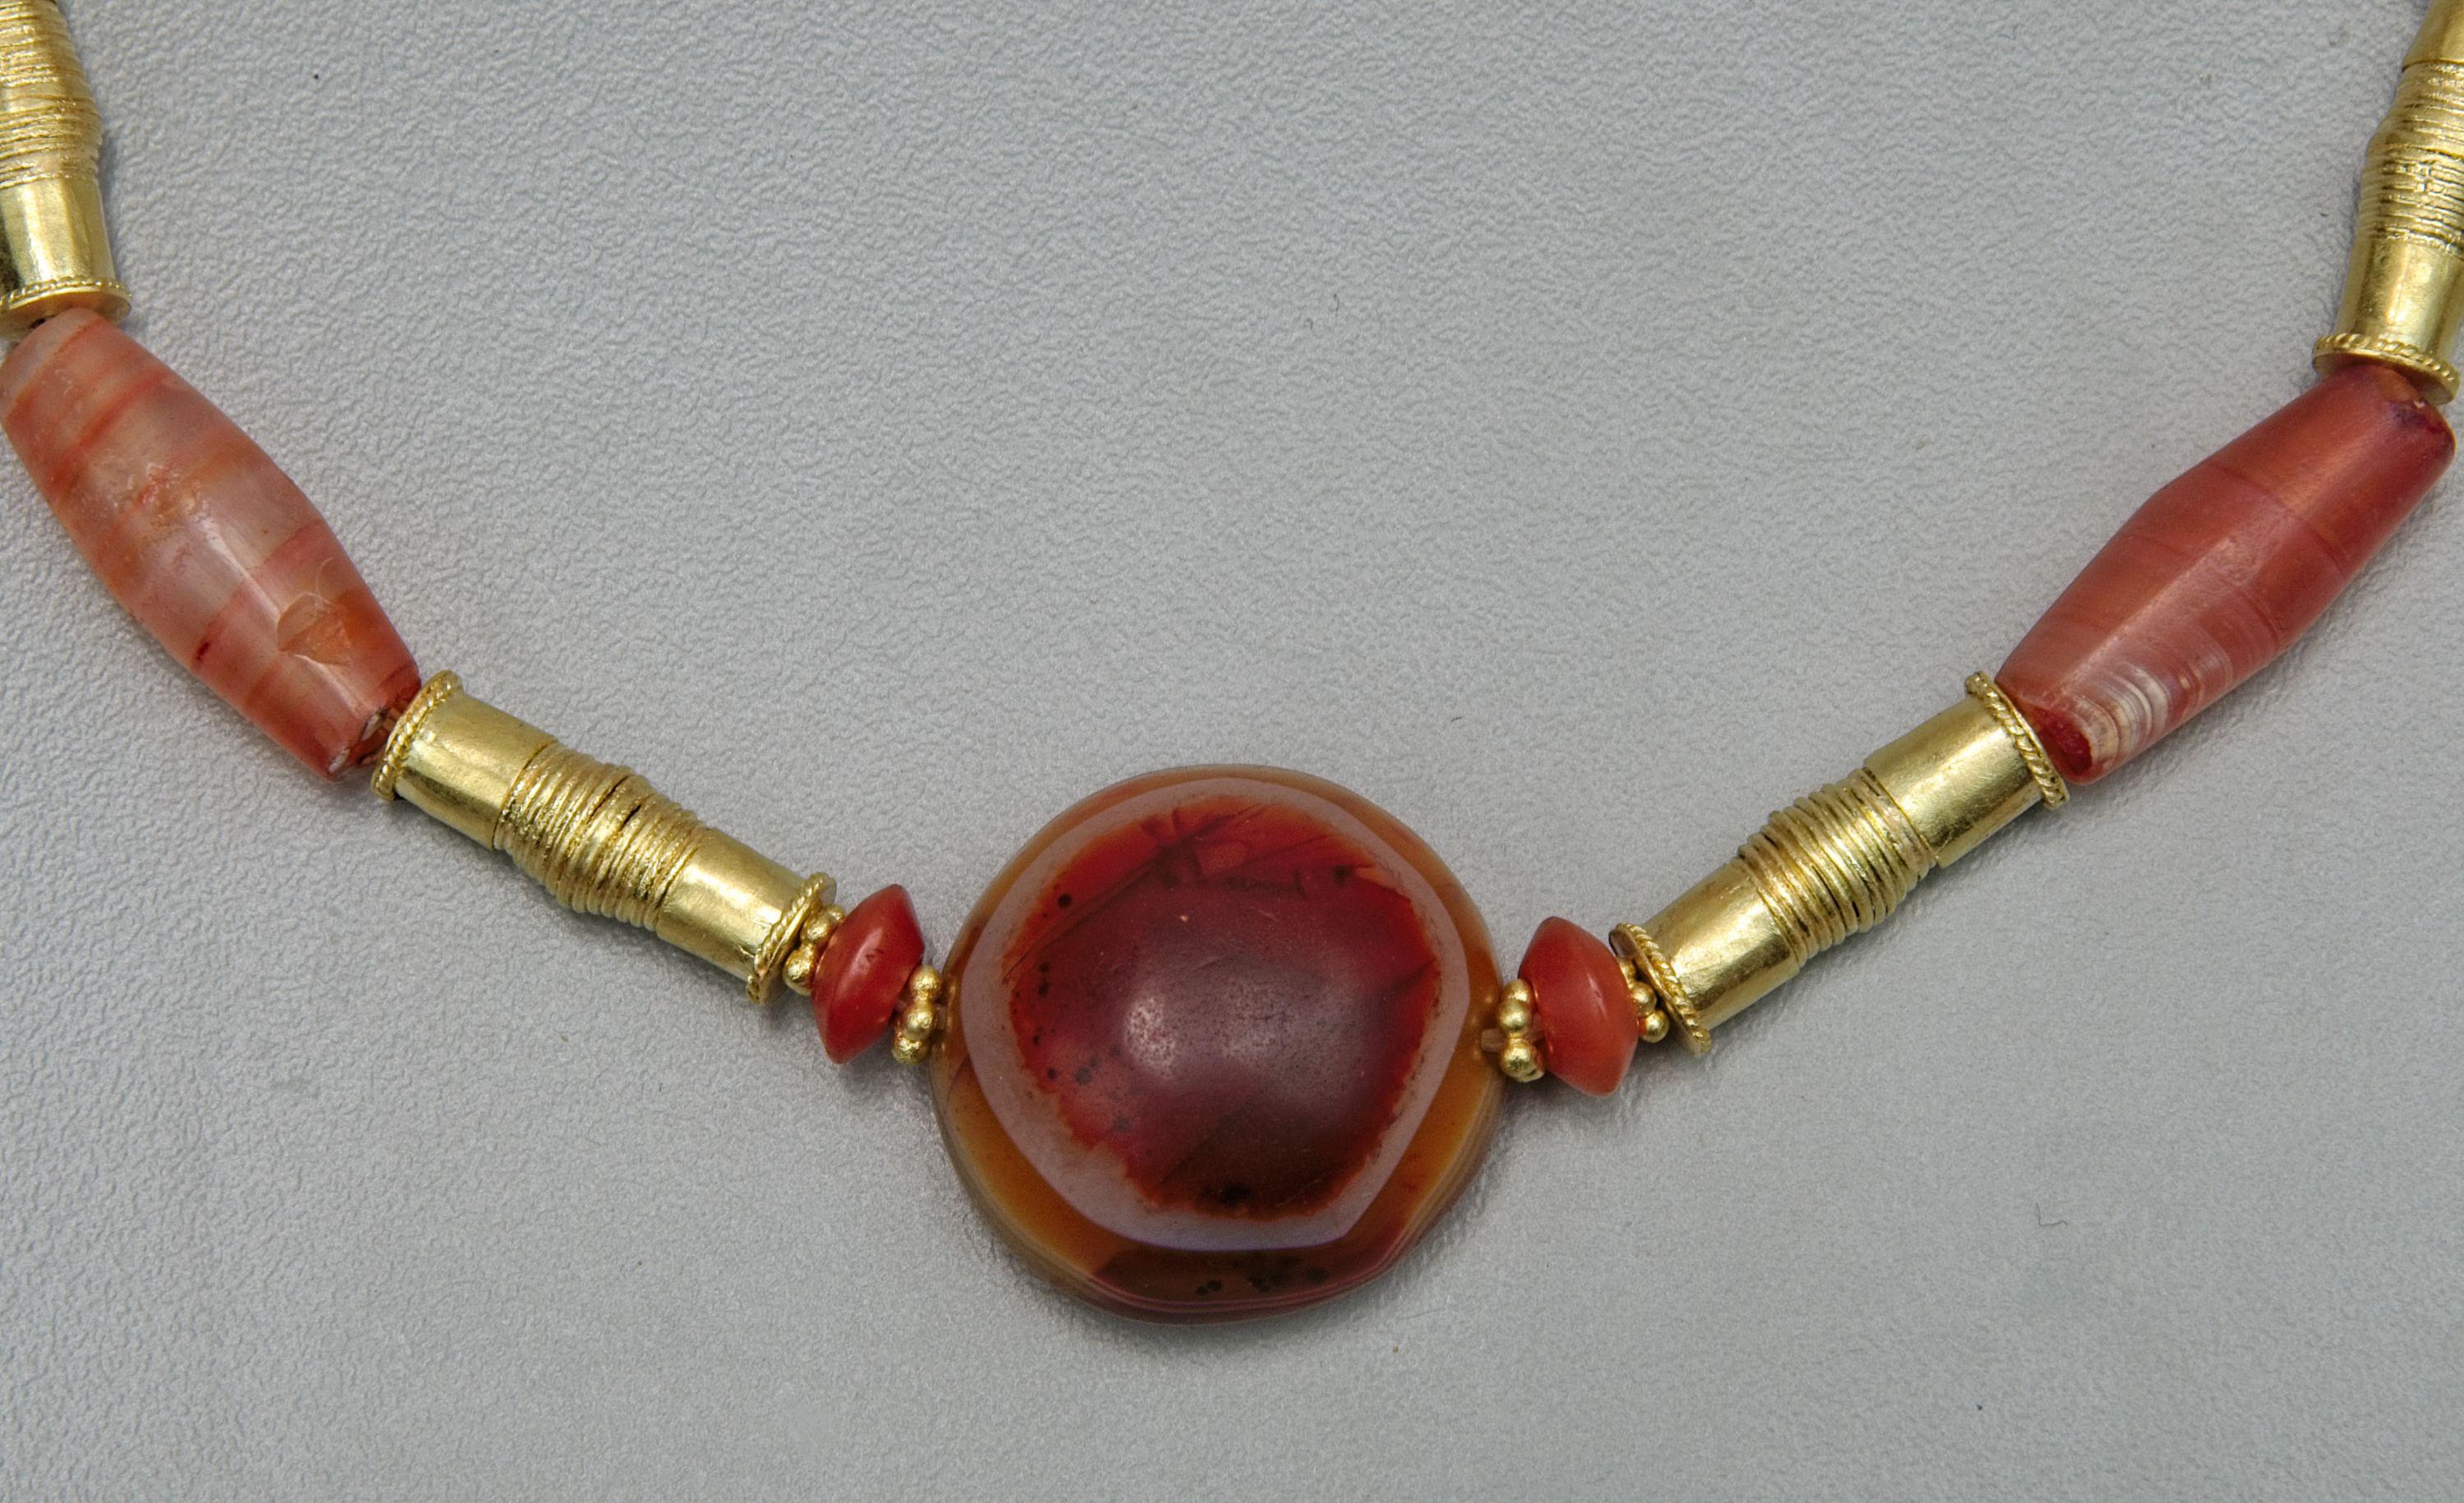 A necklace of six long carnelian tube beads, a round tabular carnelian “eye” bead, and four carnelian truncated bi cone beads. The carnelian tube beads alternate with six 20k gold beads. The small truncated bi cone carnelian beads are each faced